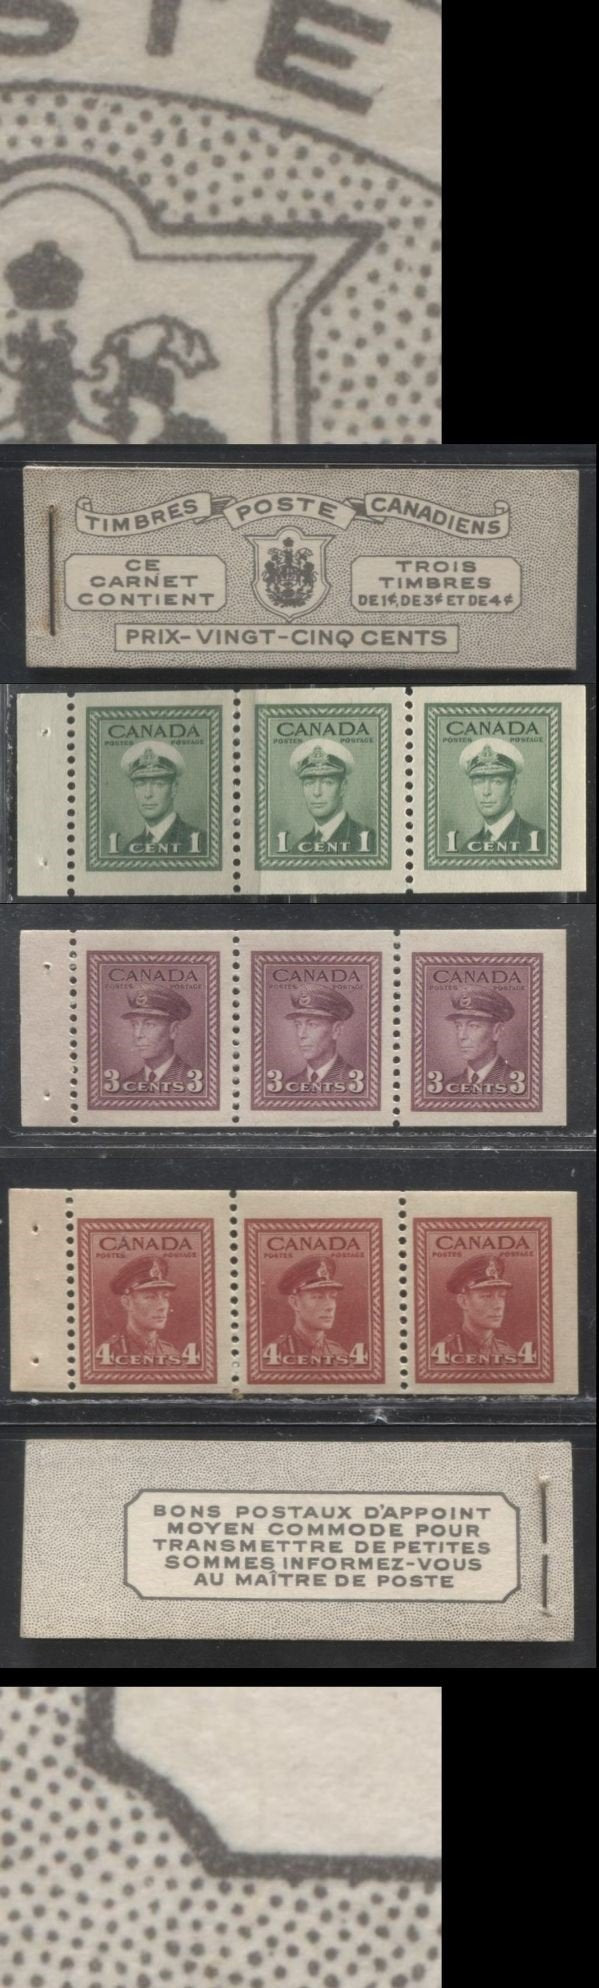 Lot 209 Canada #BK38a 1942-1949 War Issue Complete 25c, French Booklet Containing 1 Pane Each of 3 of 1c Green, 3c Rosy Plum and 4c Carmine Red, Harris Front Cover Type Vg , Back Cover Jii, 7c & 6c Rate Page